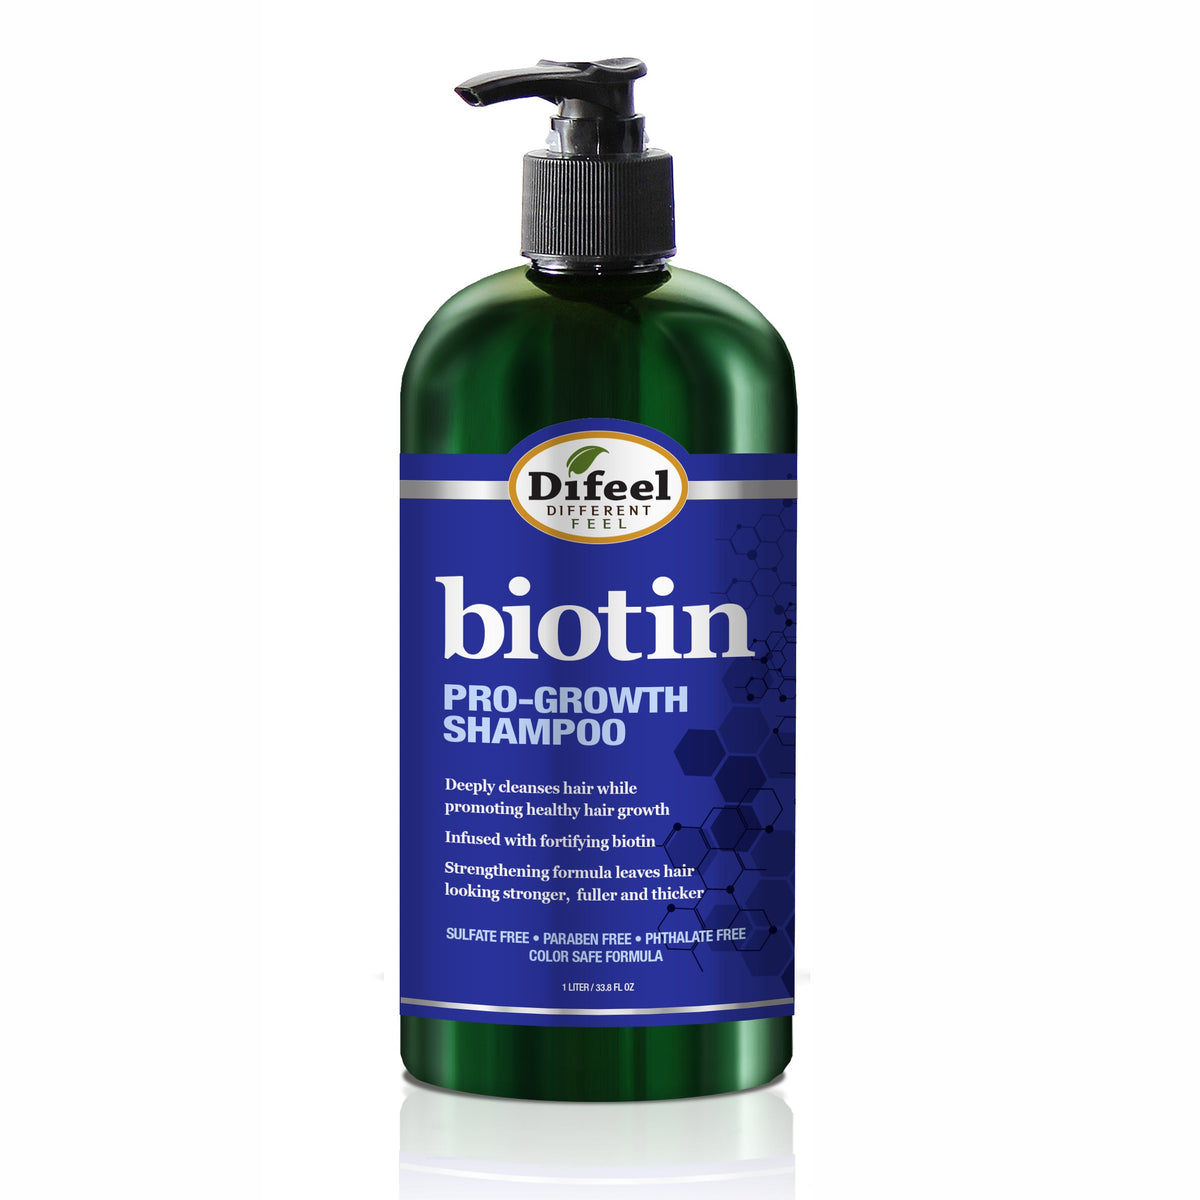 Difeel Biotin Pro-Growth Shampoo 33.8 oz. by difeel - find your natural beauty